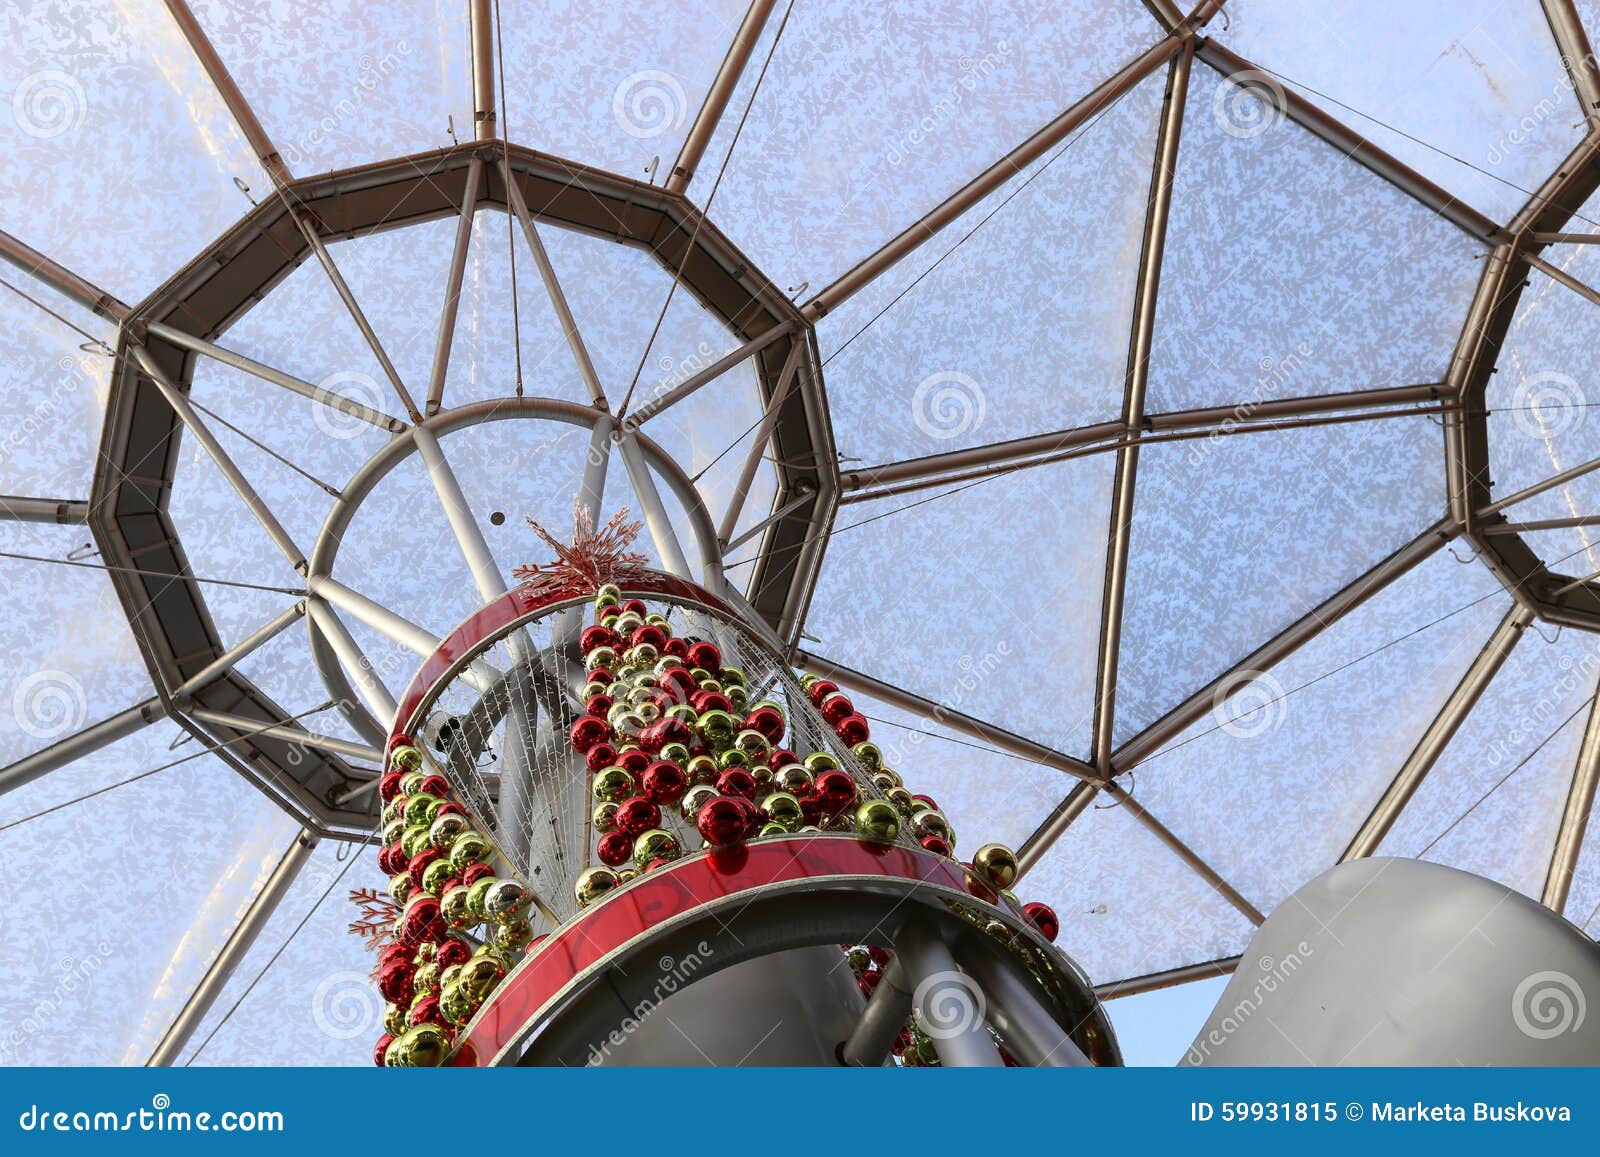 Christmas Decorations in Singapore Stock Image  Image of star, dreams